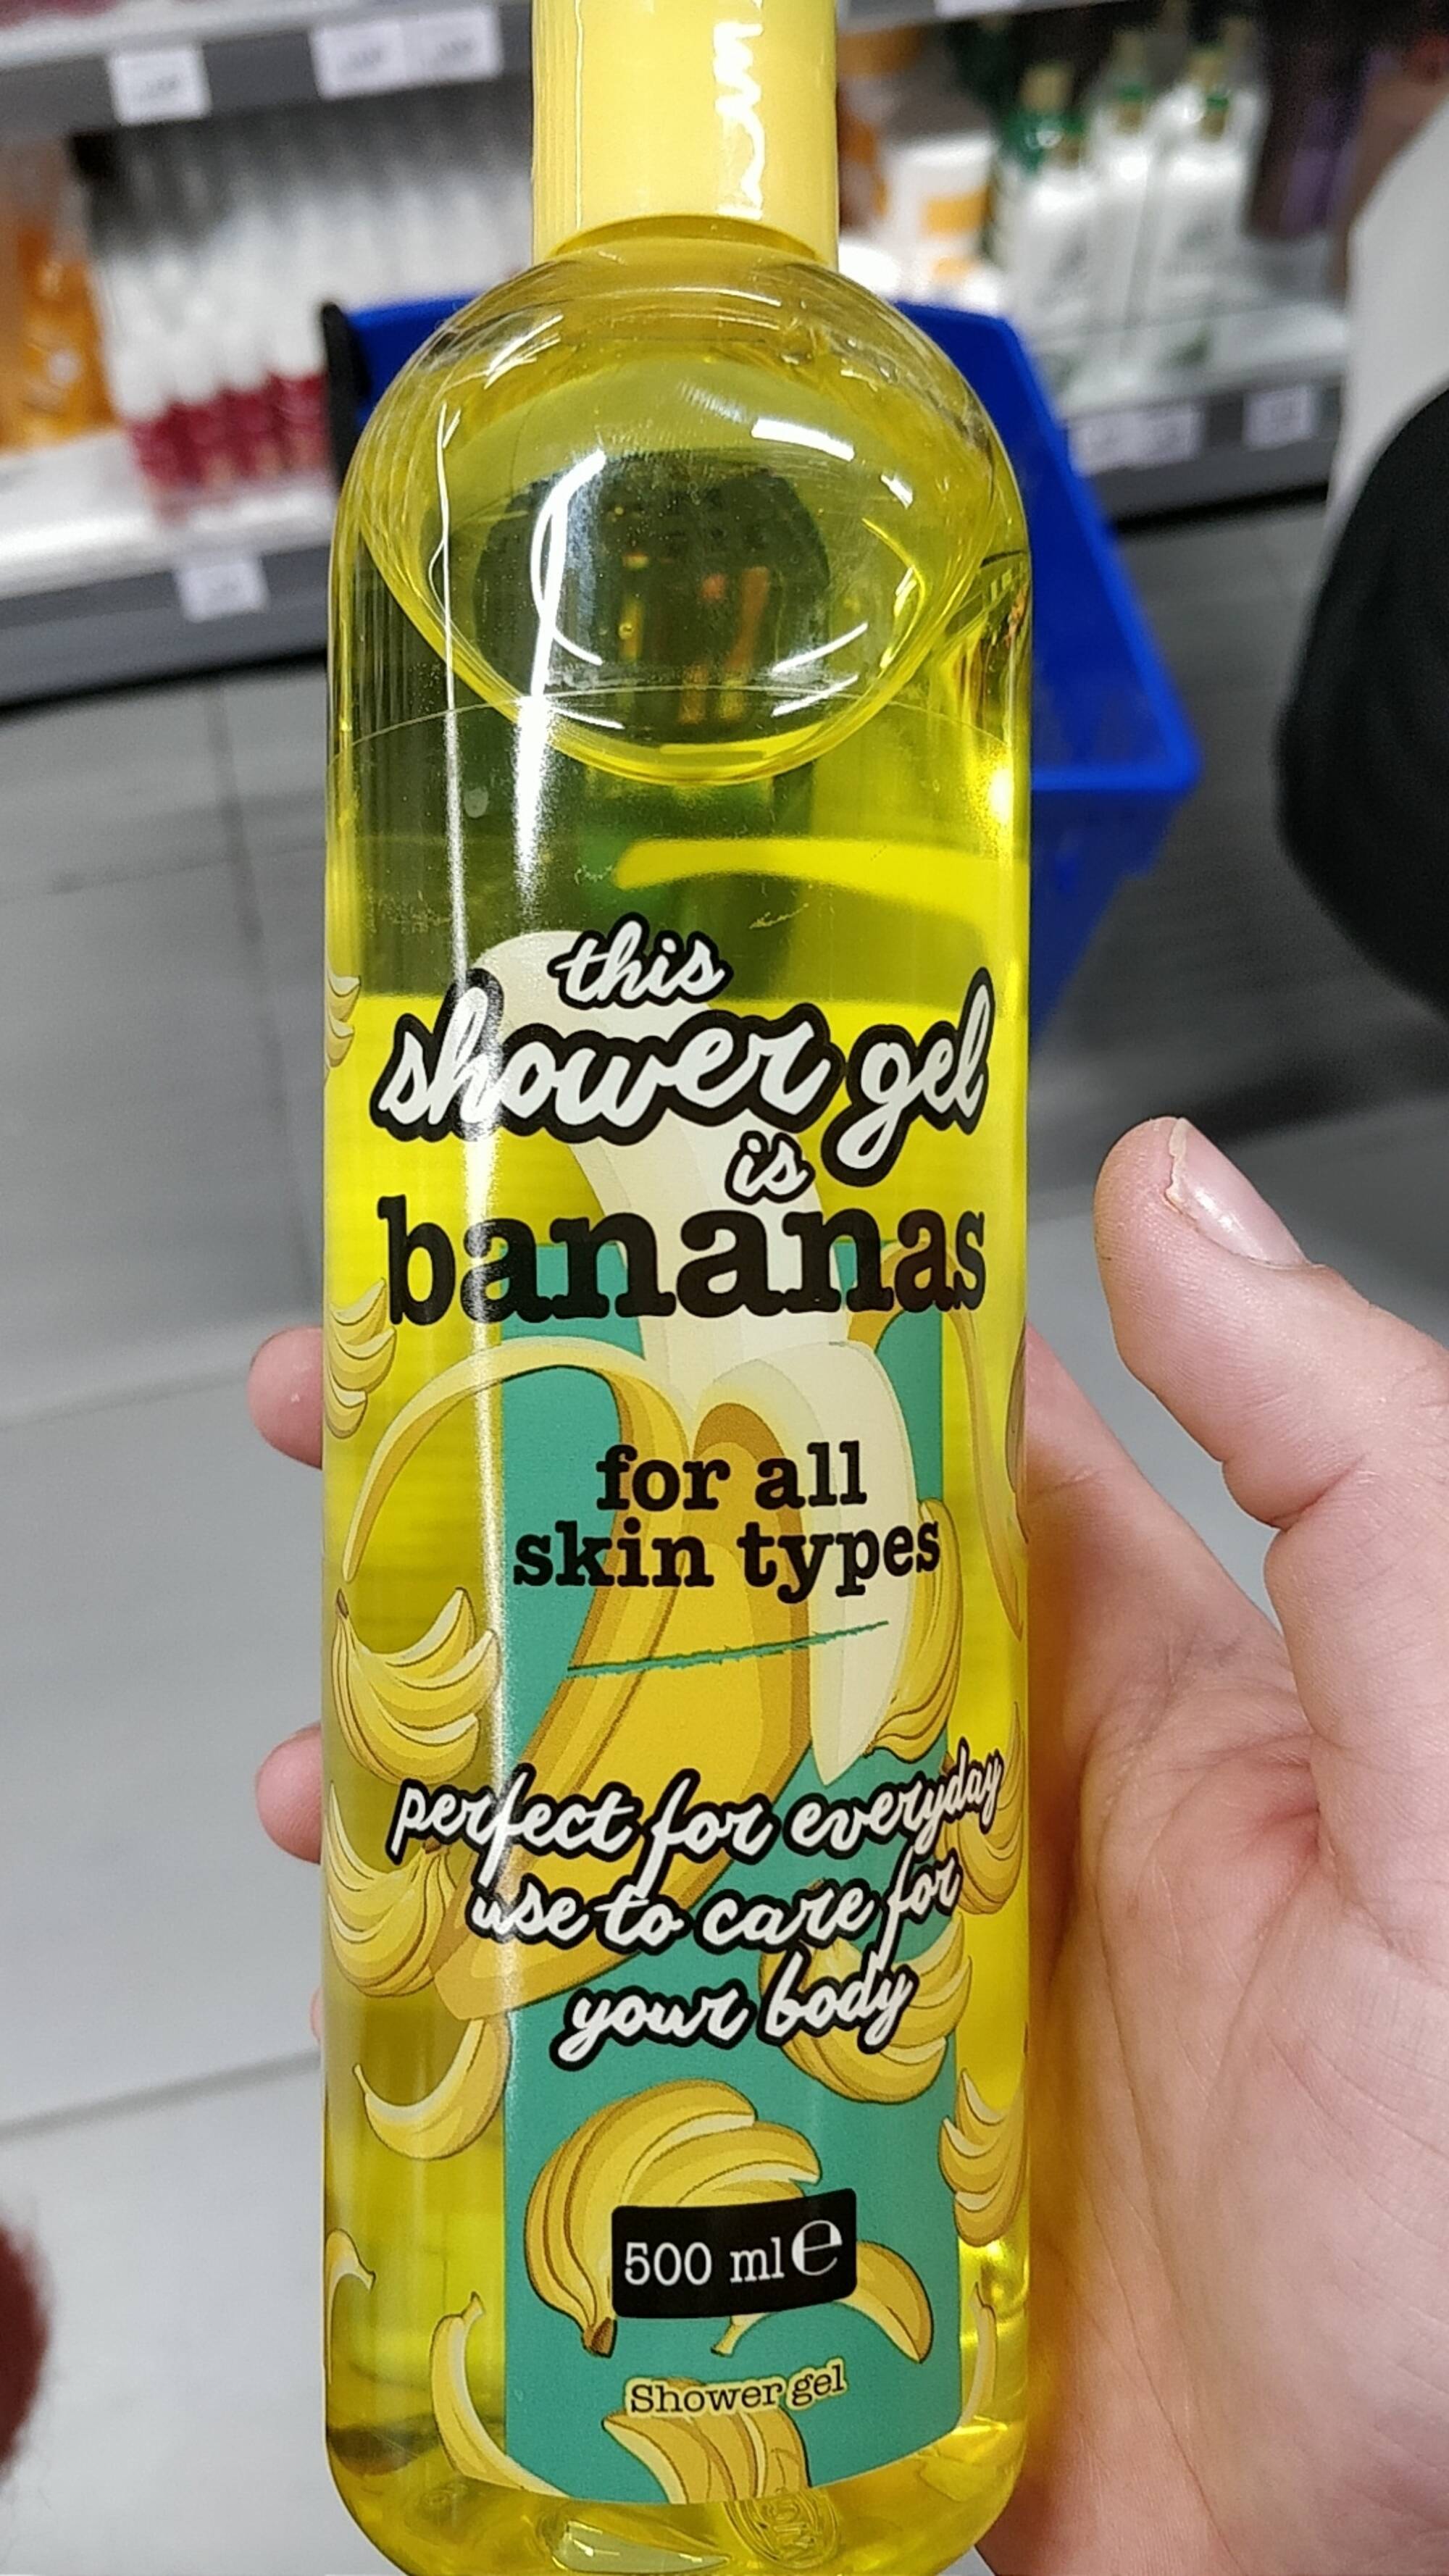 MAXBRANDS - This shower gel is bananas